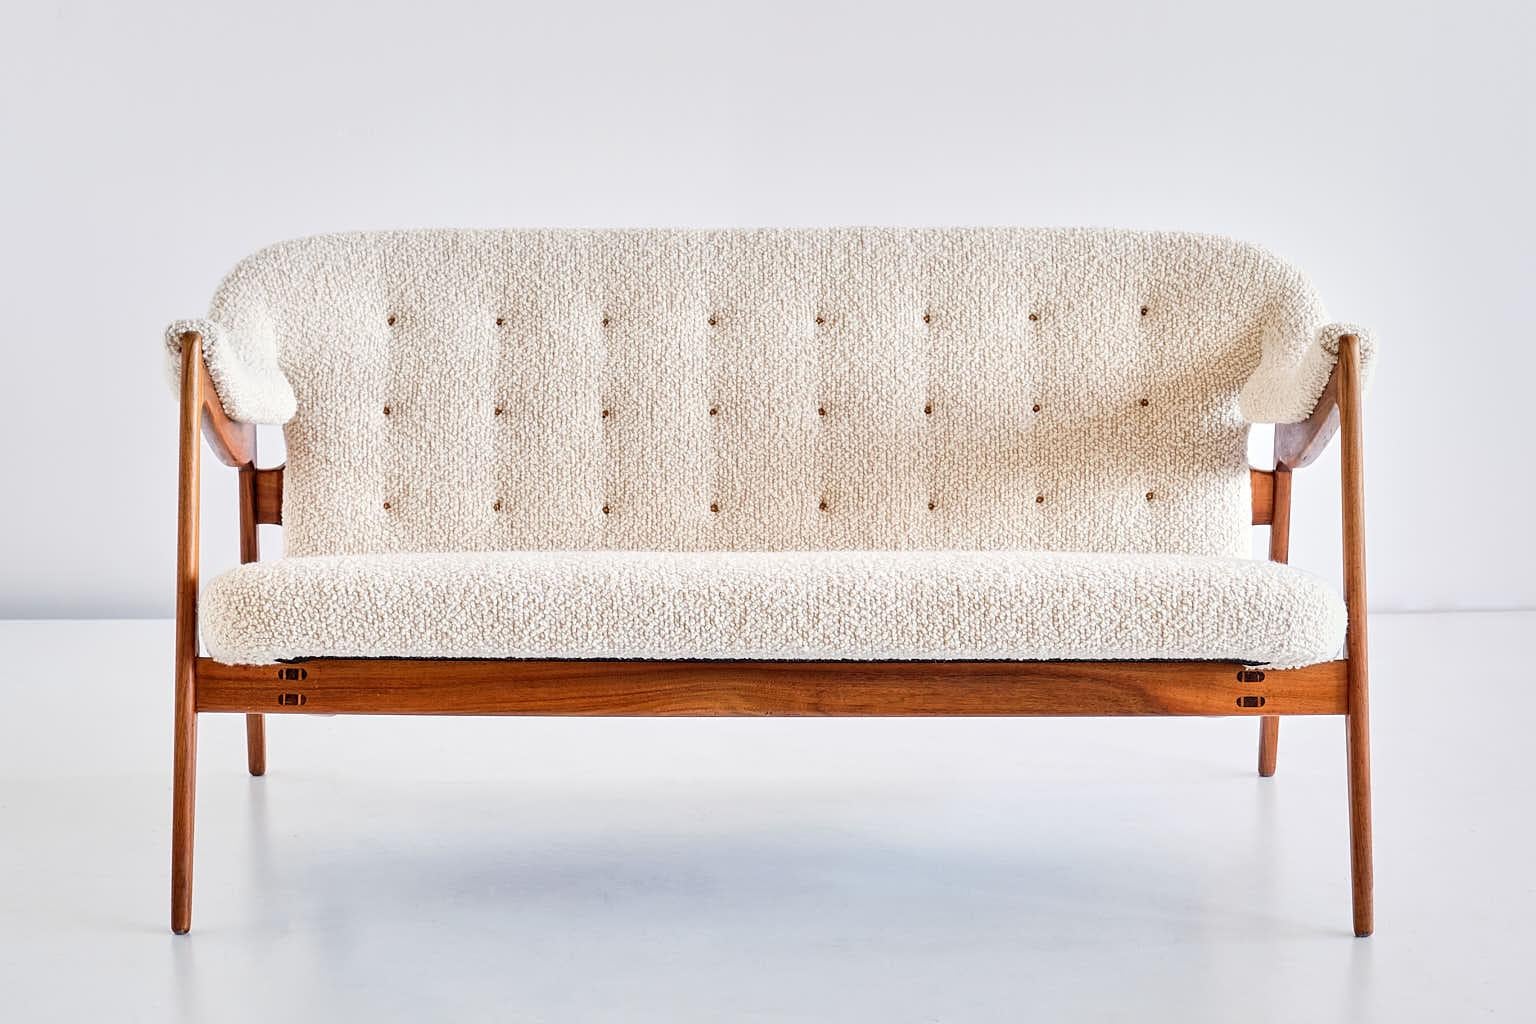 This exceptionally rare two seater sofa was designed by Brockmann Petersen and produced by the cabinet maker Louis G. Thiersen & Søn in 1951. This design was presented at the 1951 Cabinetmakers' Exhibition in Copenhagen. The sofa on offer here is